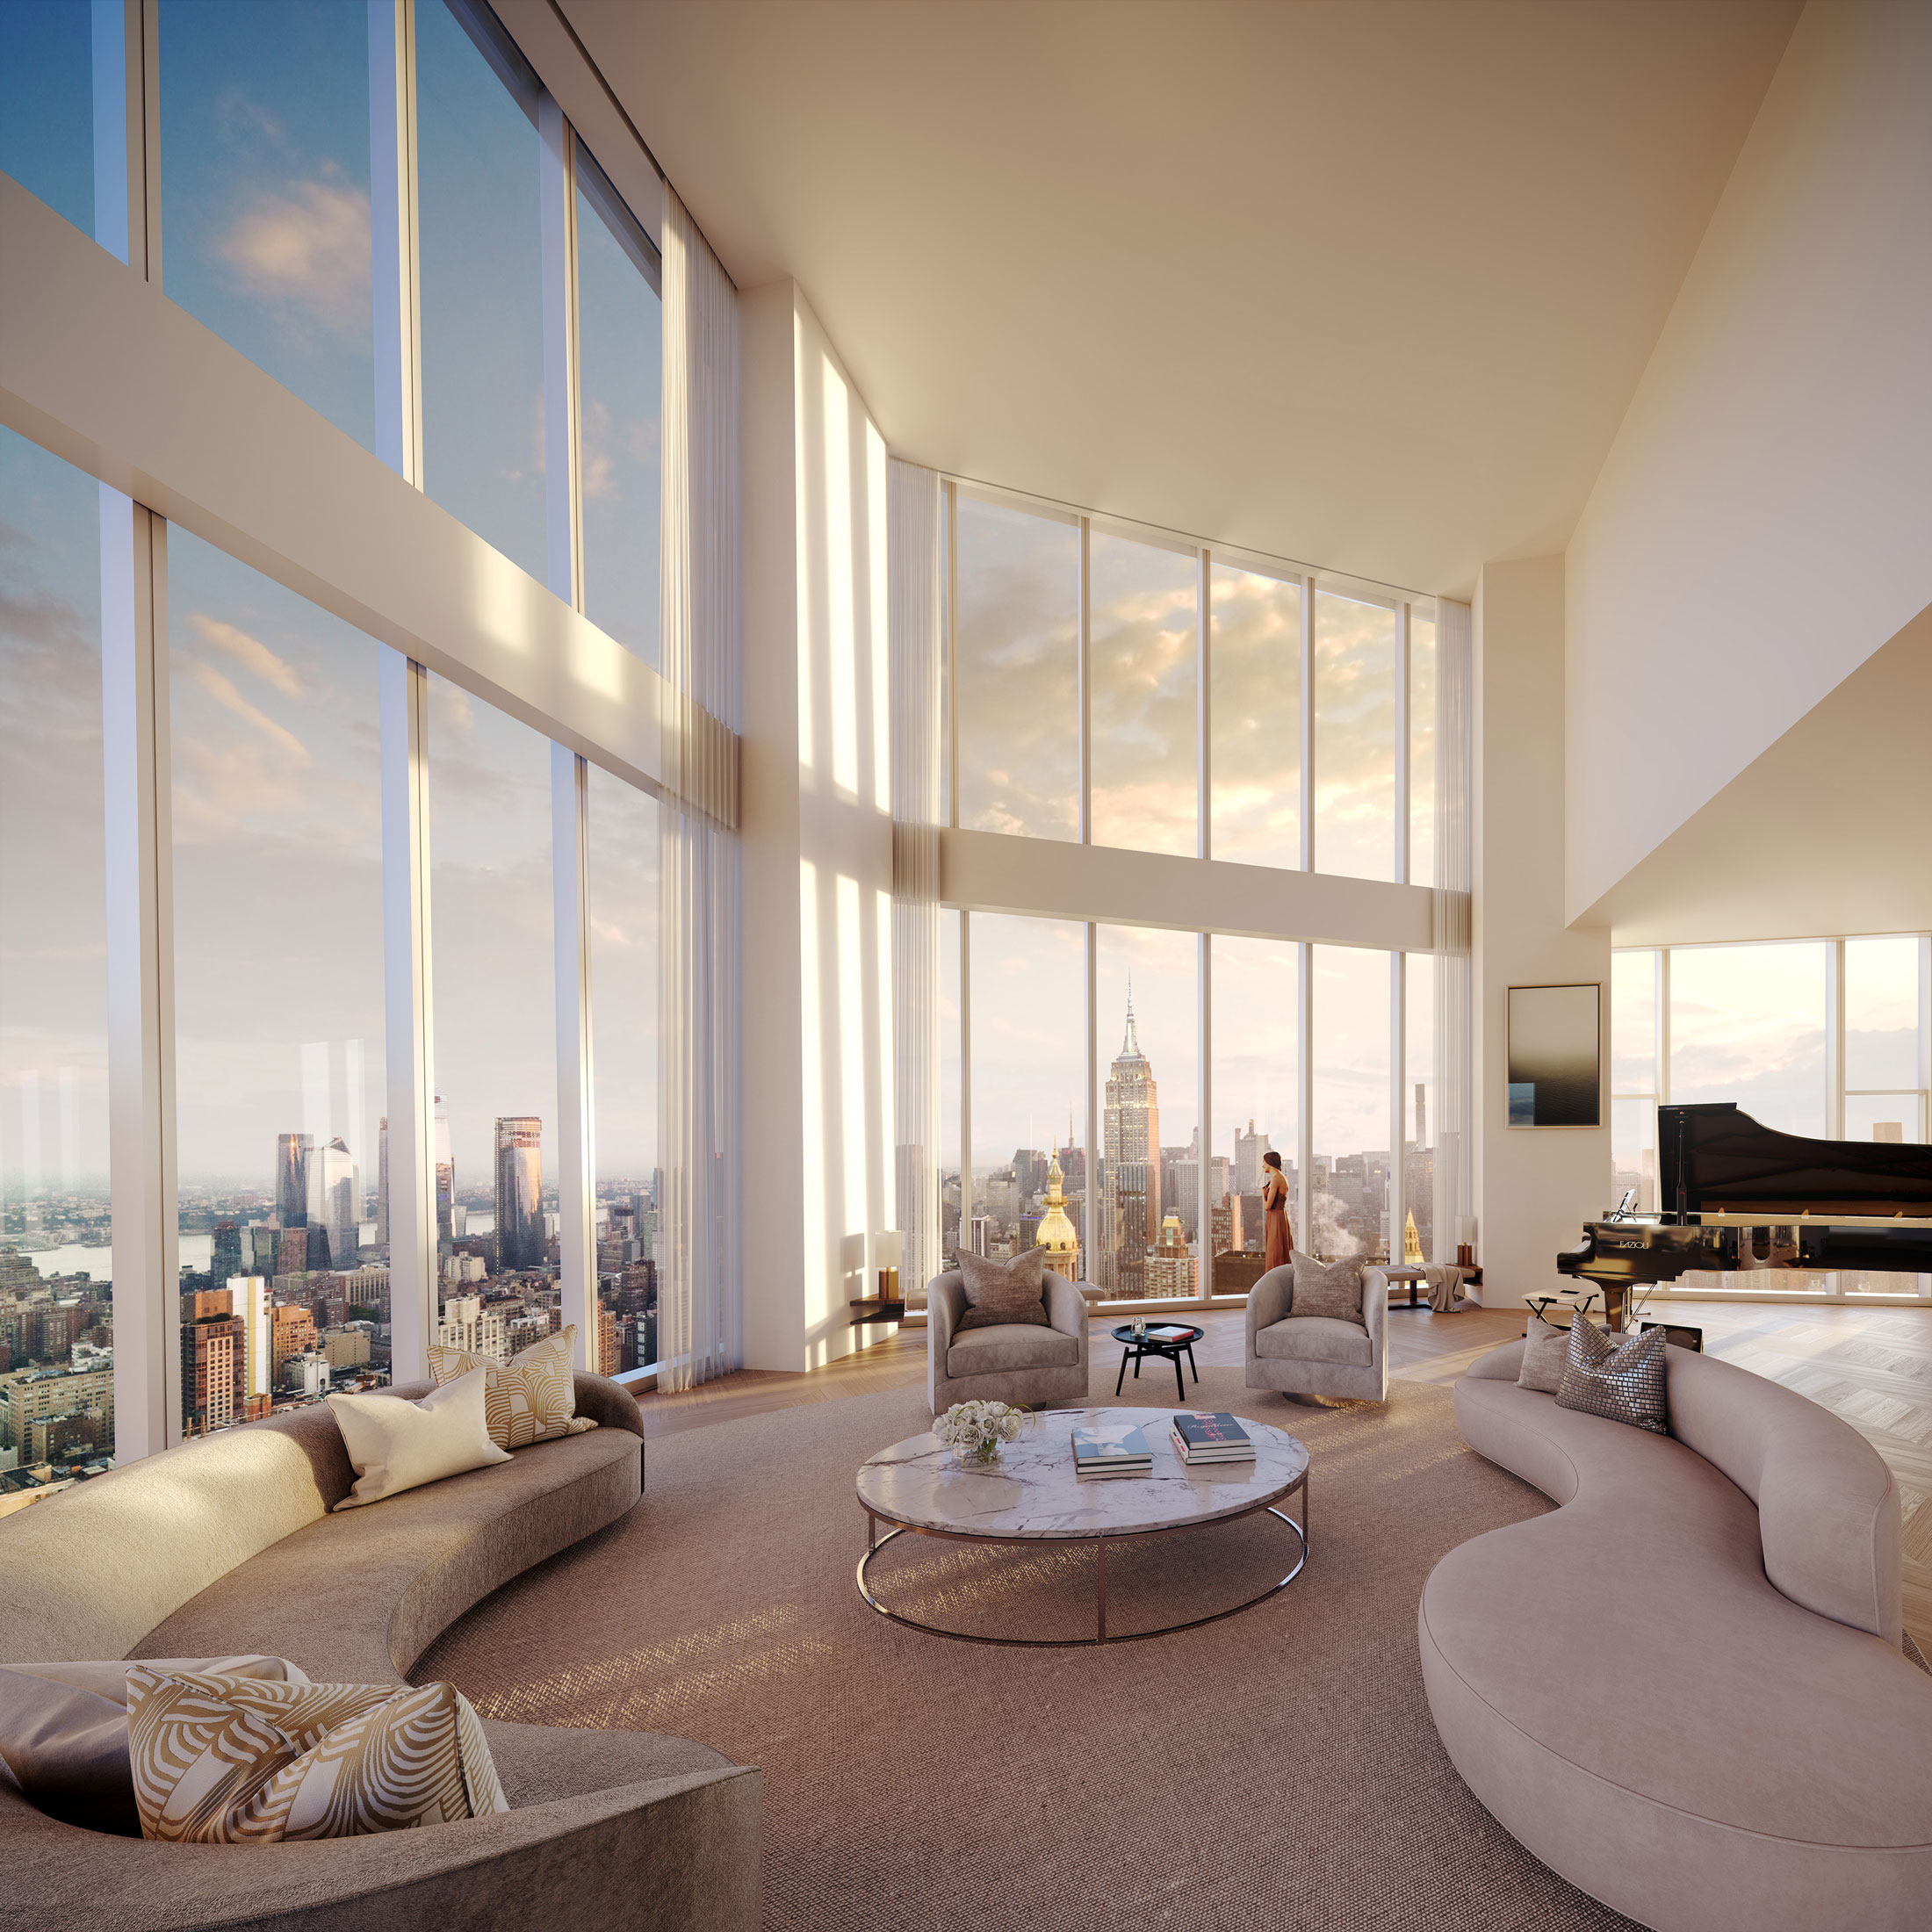 Architectural Rendering of the interior of the Madison Square Park Tower's Penthouse project located in New York City